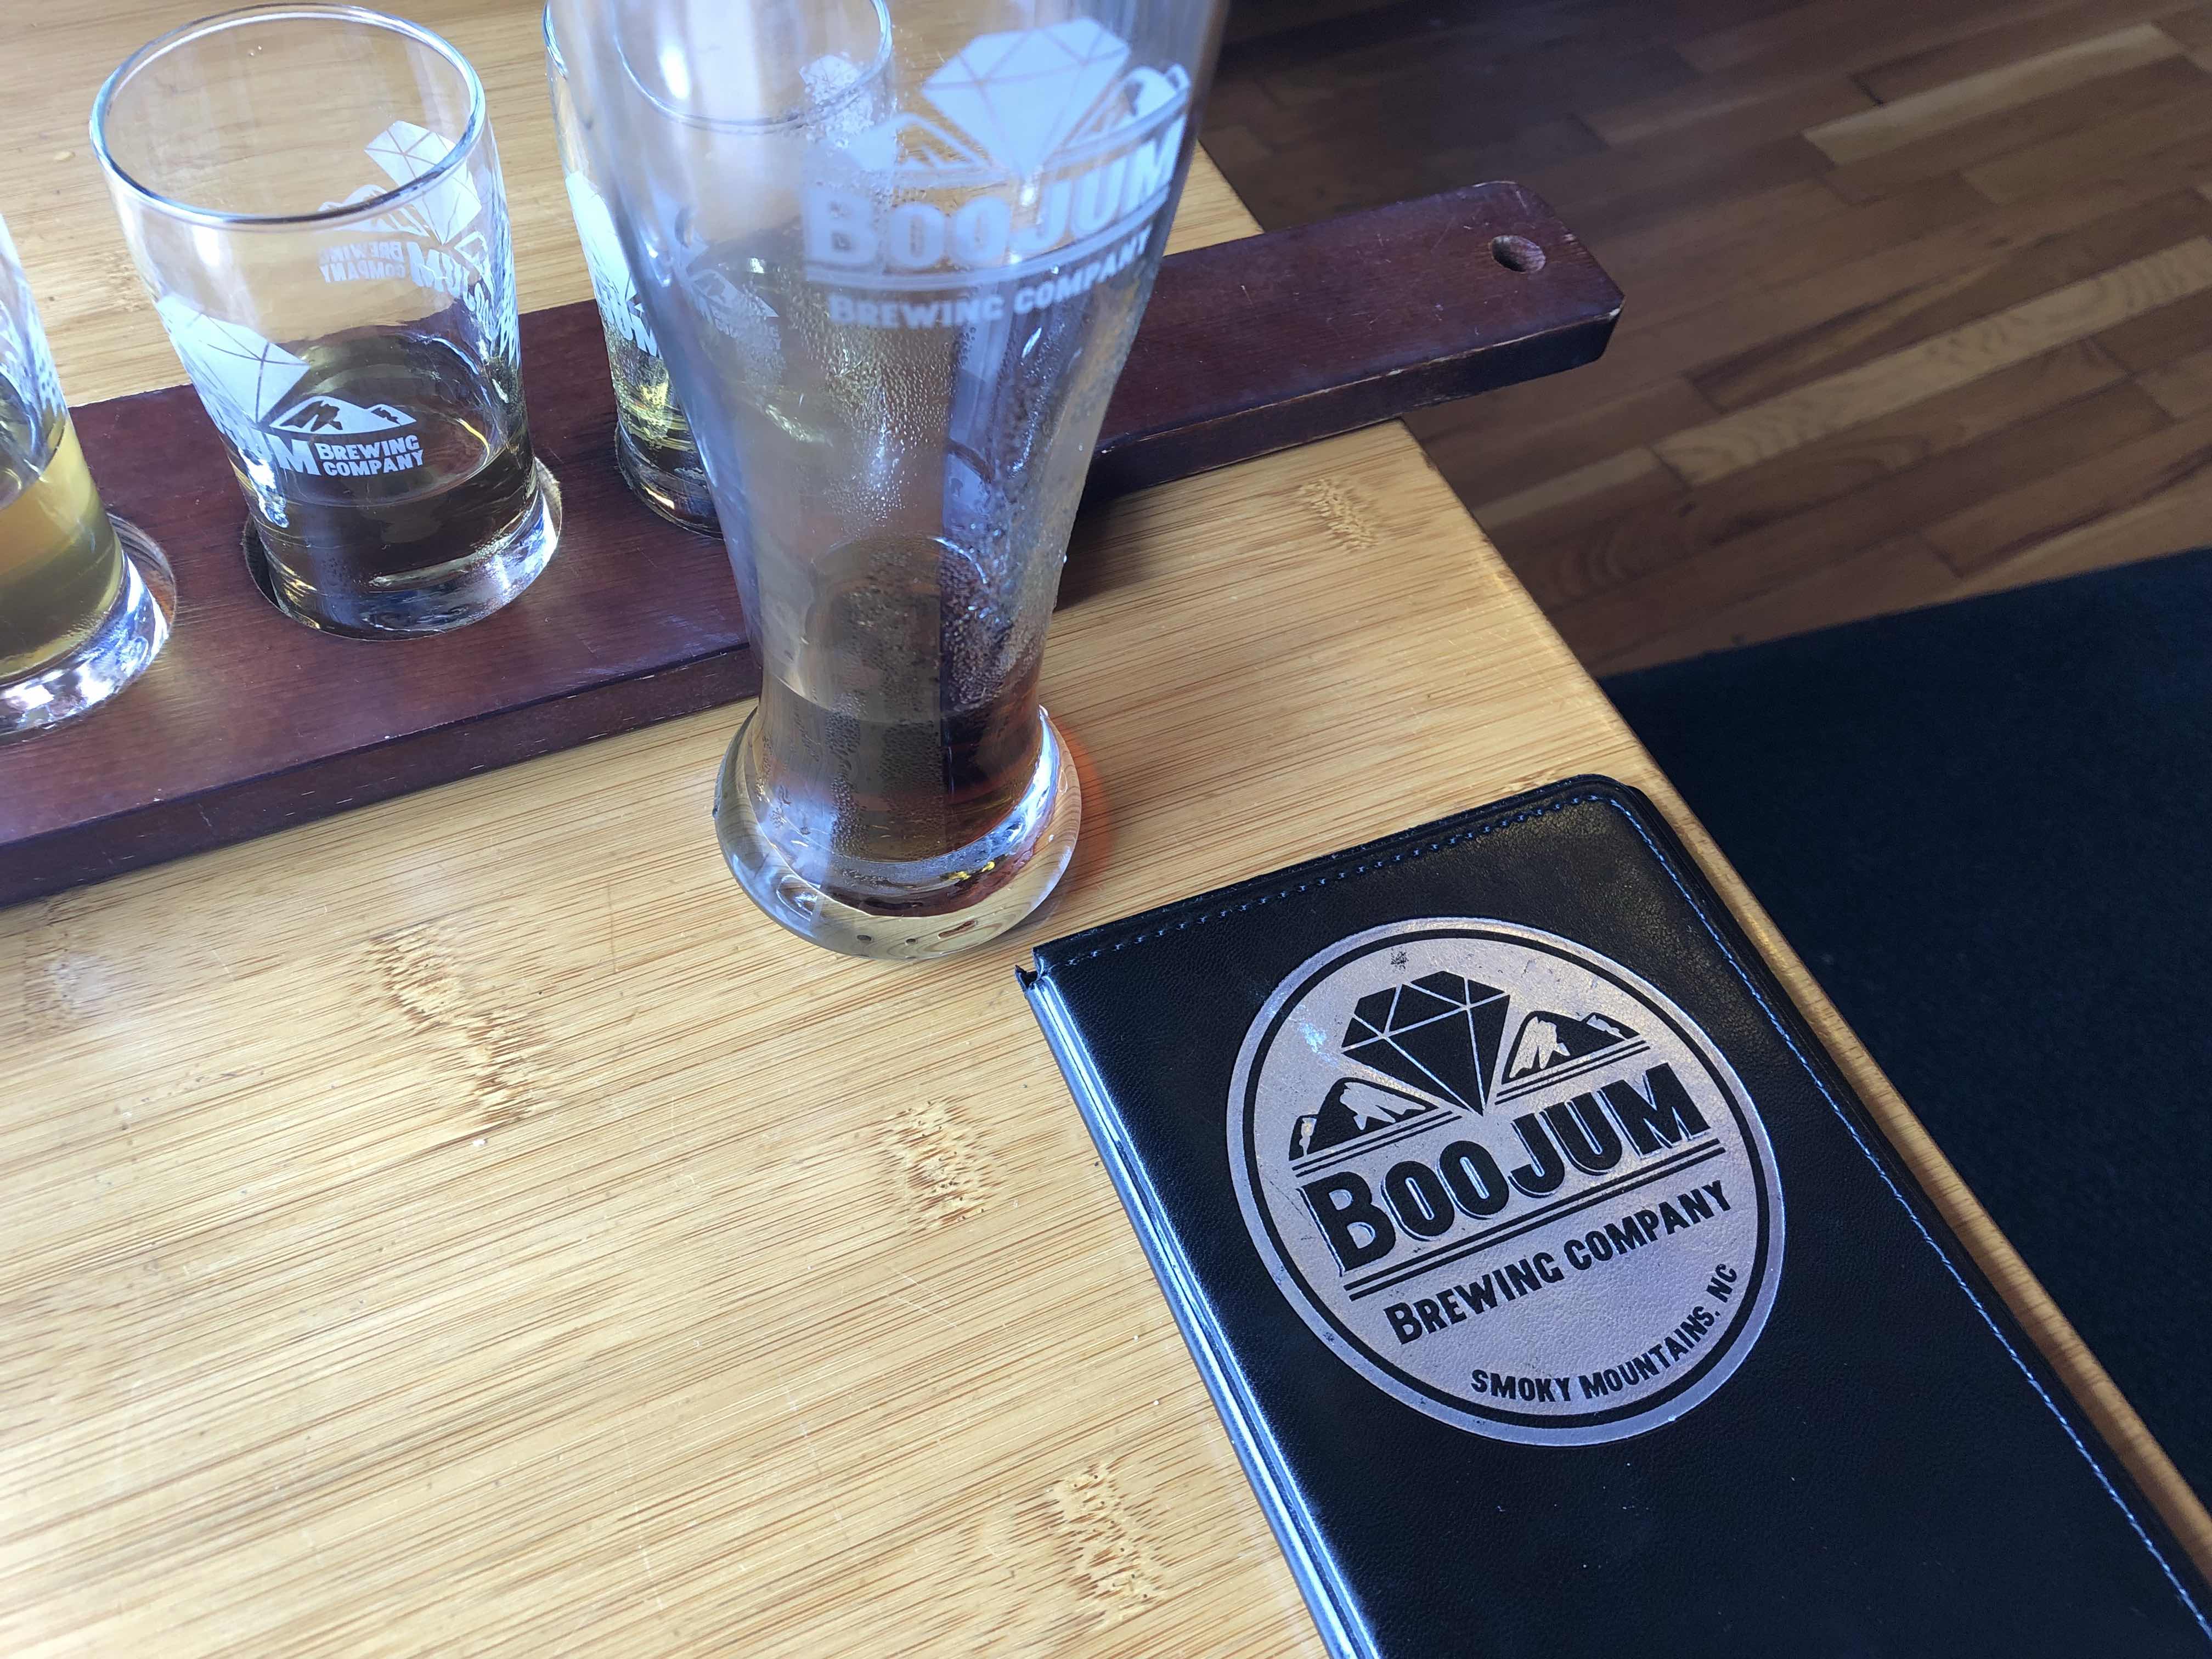 A side trip to Waynesville, NC and Boojum Brewery.